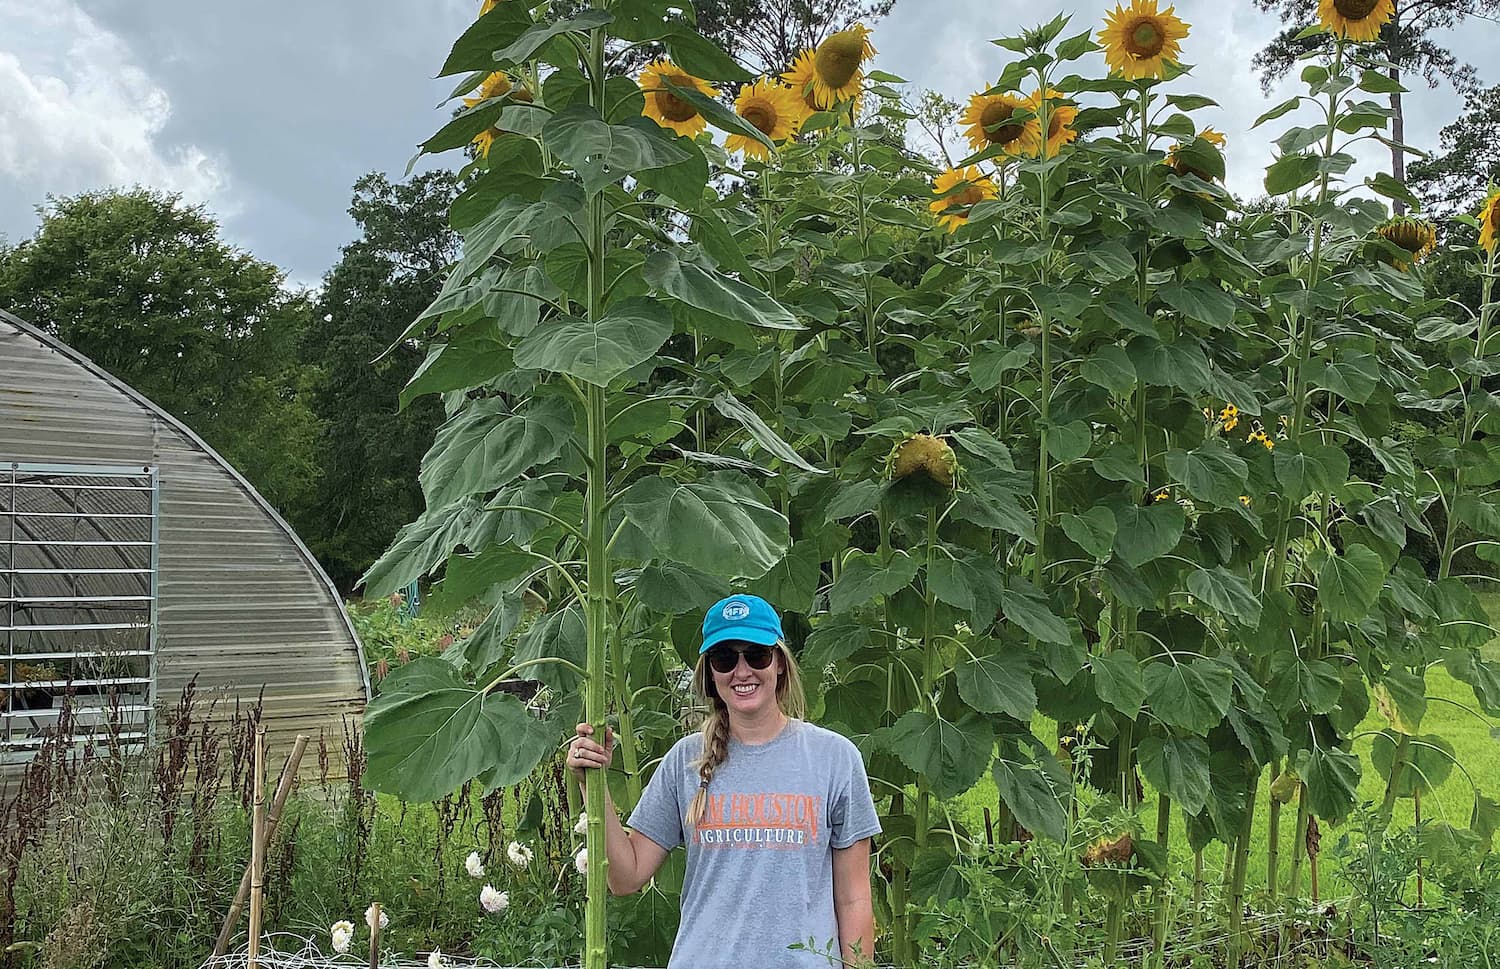 An SHSU student wearing a Sam Houston State Agriculture t-shirt and a hat stands grasping a sunflow stem that is nearly twice her height.